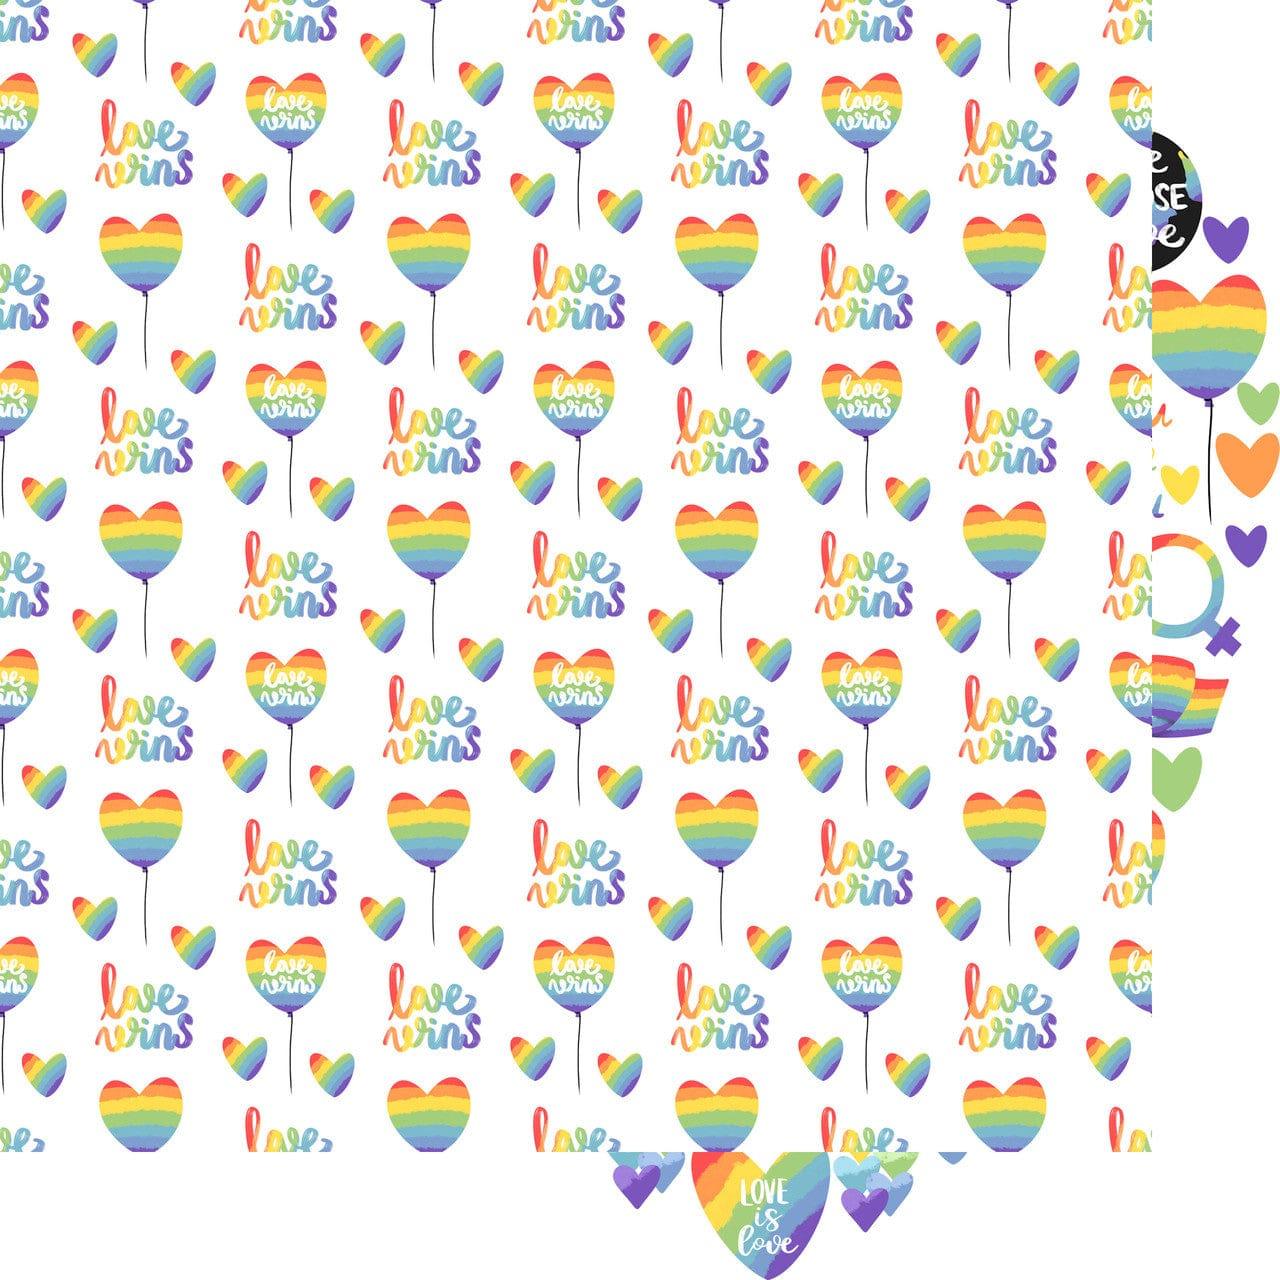 Love Wins Collection Love Wins 12 x 12 Double-Sided Scrapbook Paper by SSC Designs - Scrapbook Supply Companies